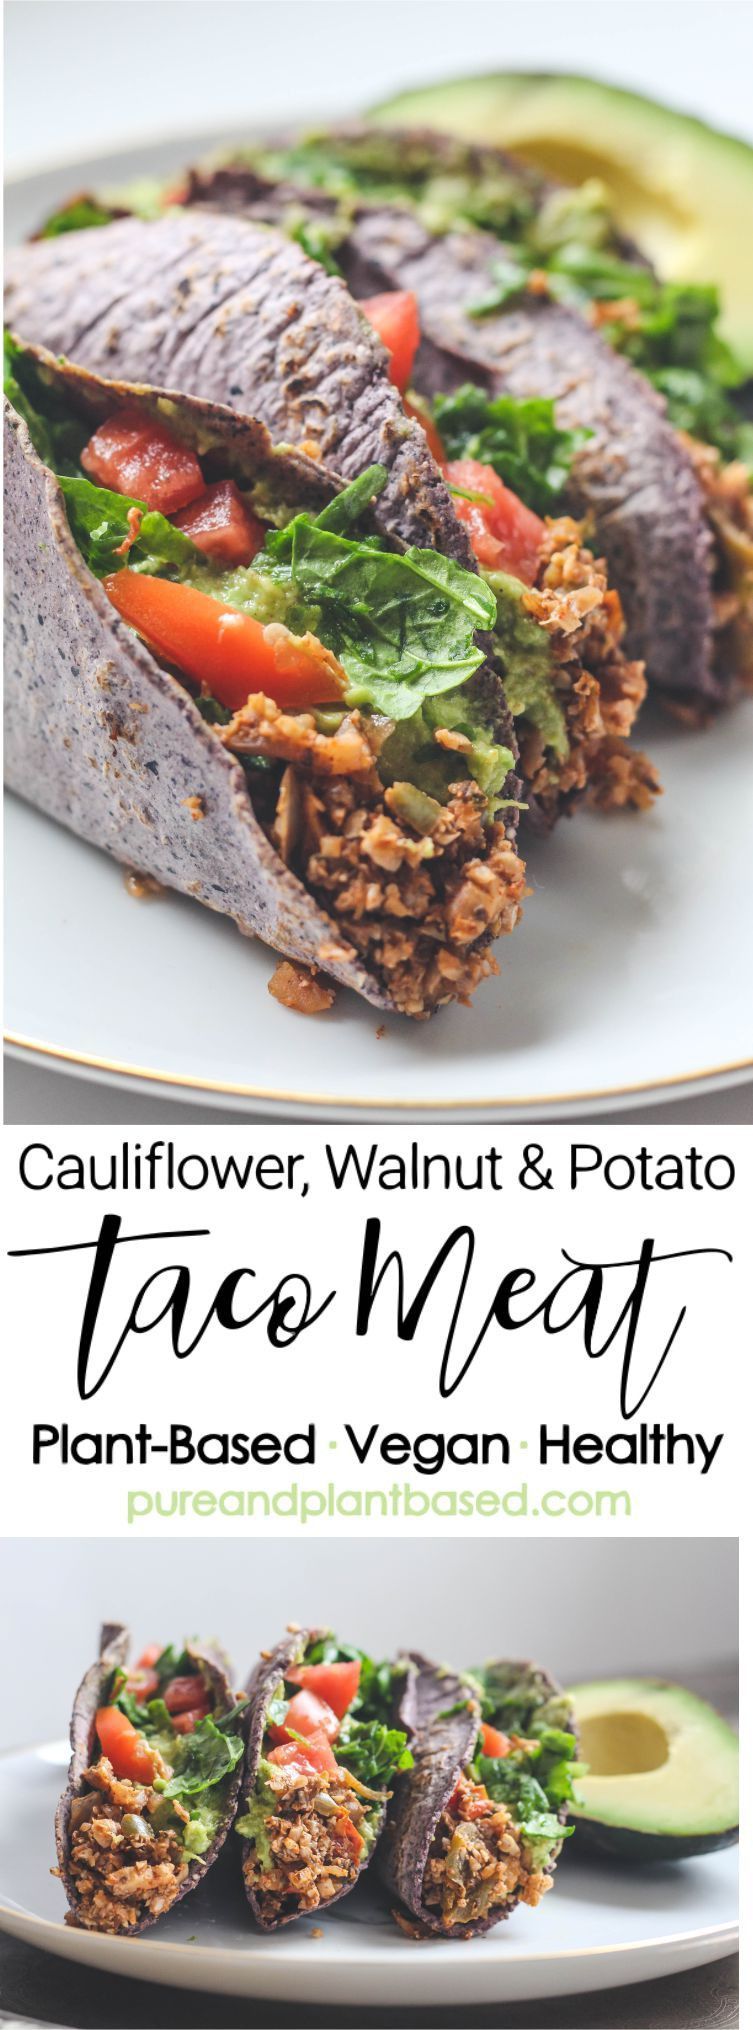 Plant-Based Taco Meat with Cauliflower, Walnuts, and Potato -   22 healthy recipes mexican
 ideas